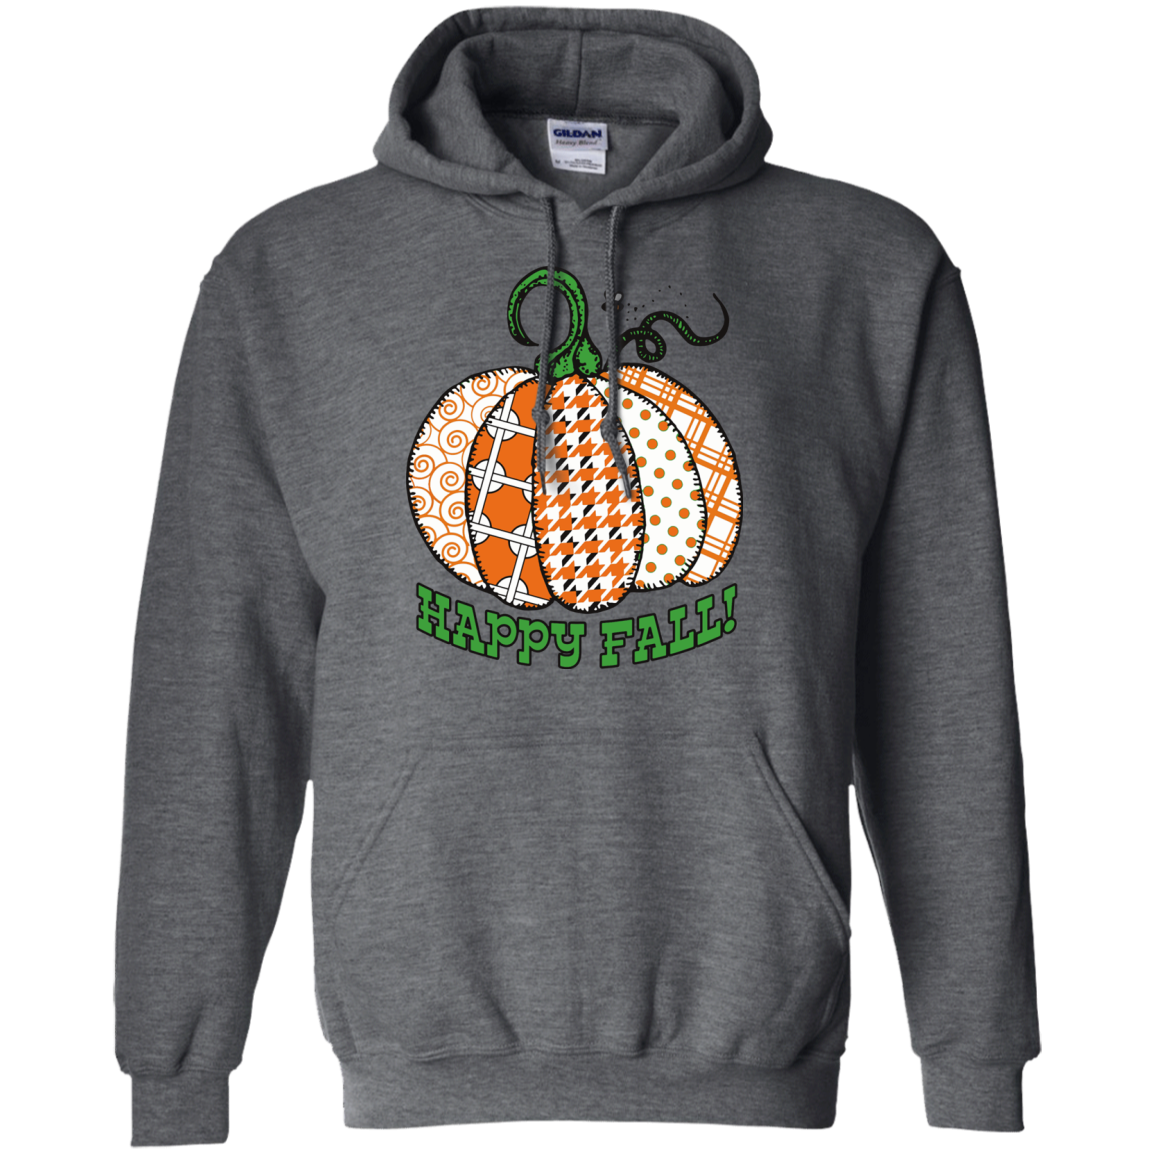 Happy Fall! Pullover Hoodies - Crafter4Life - 5